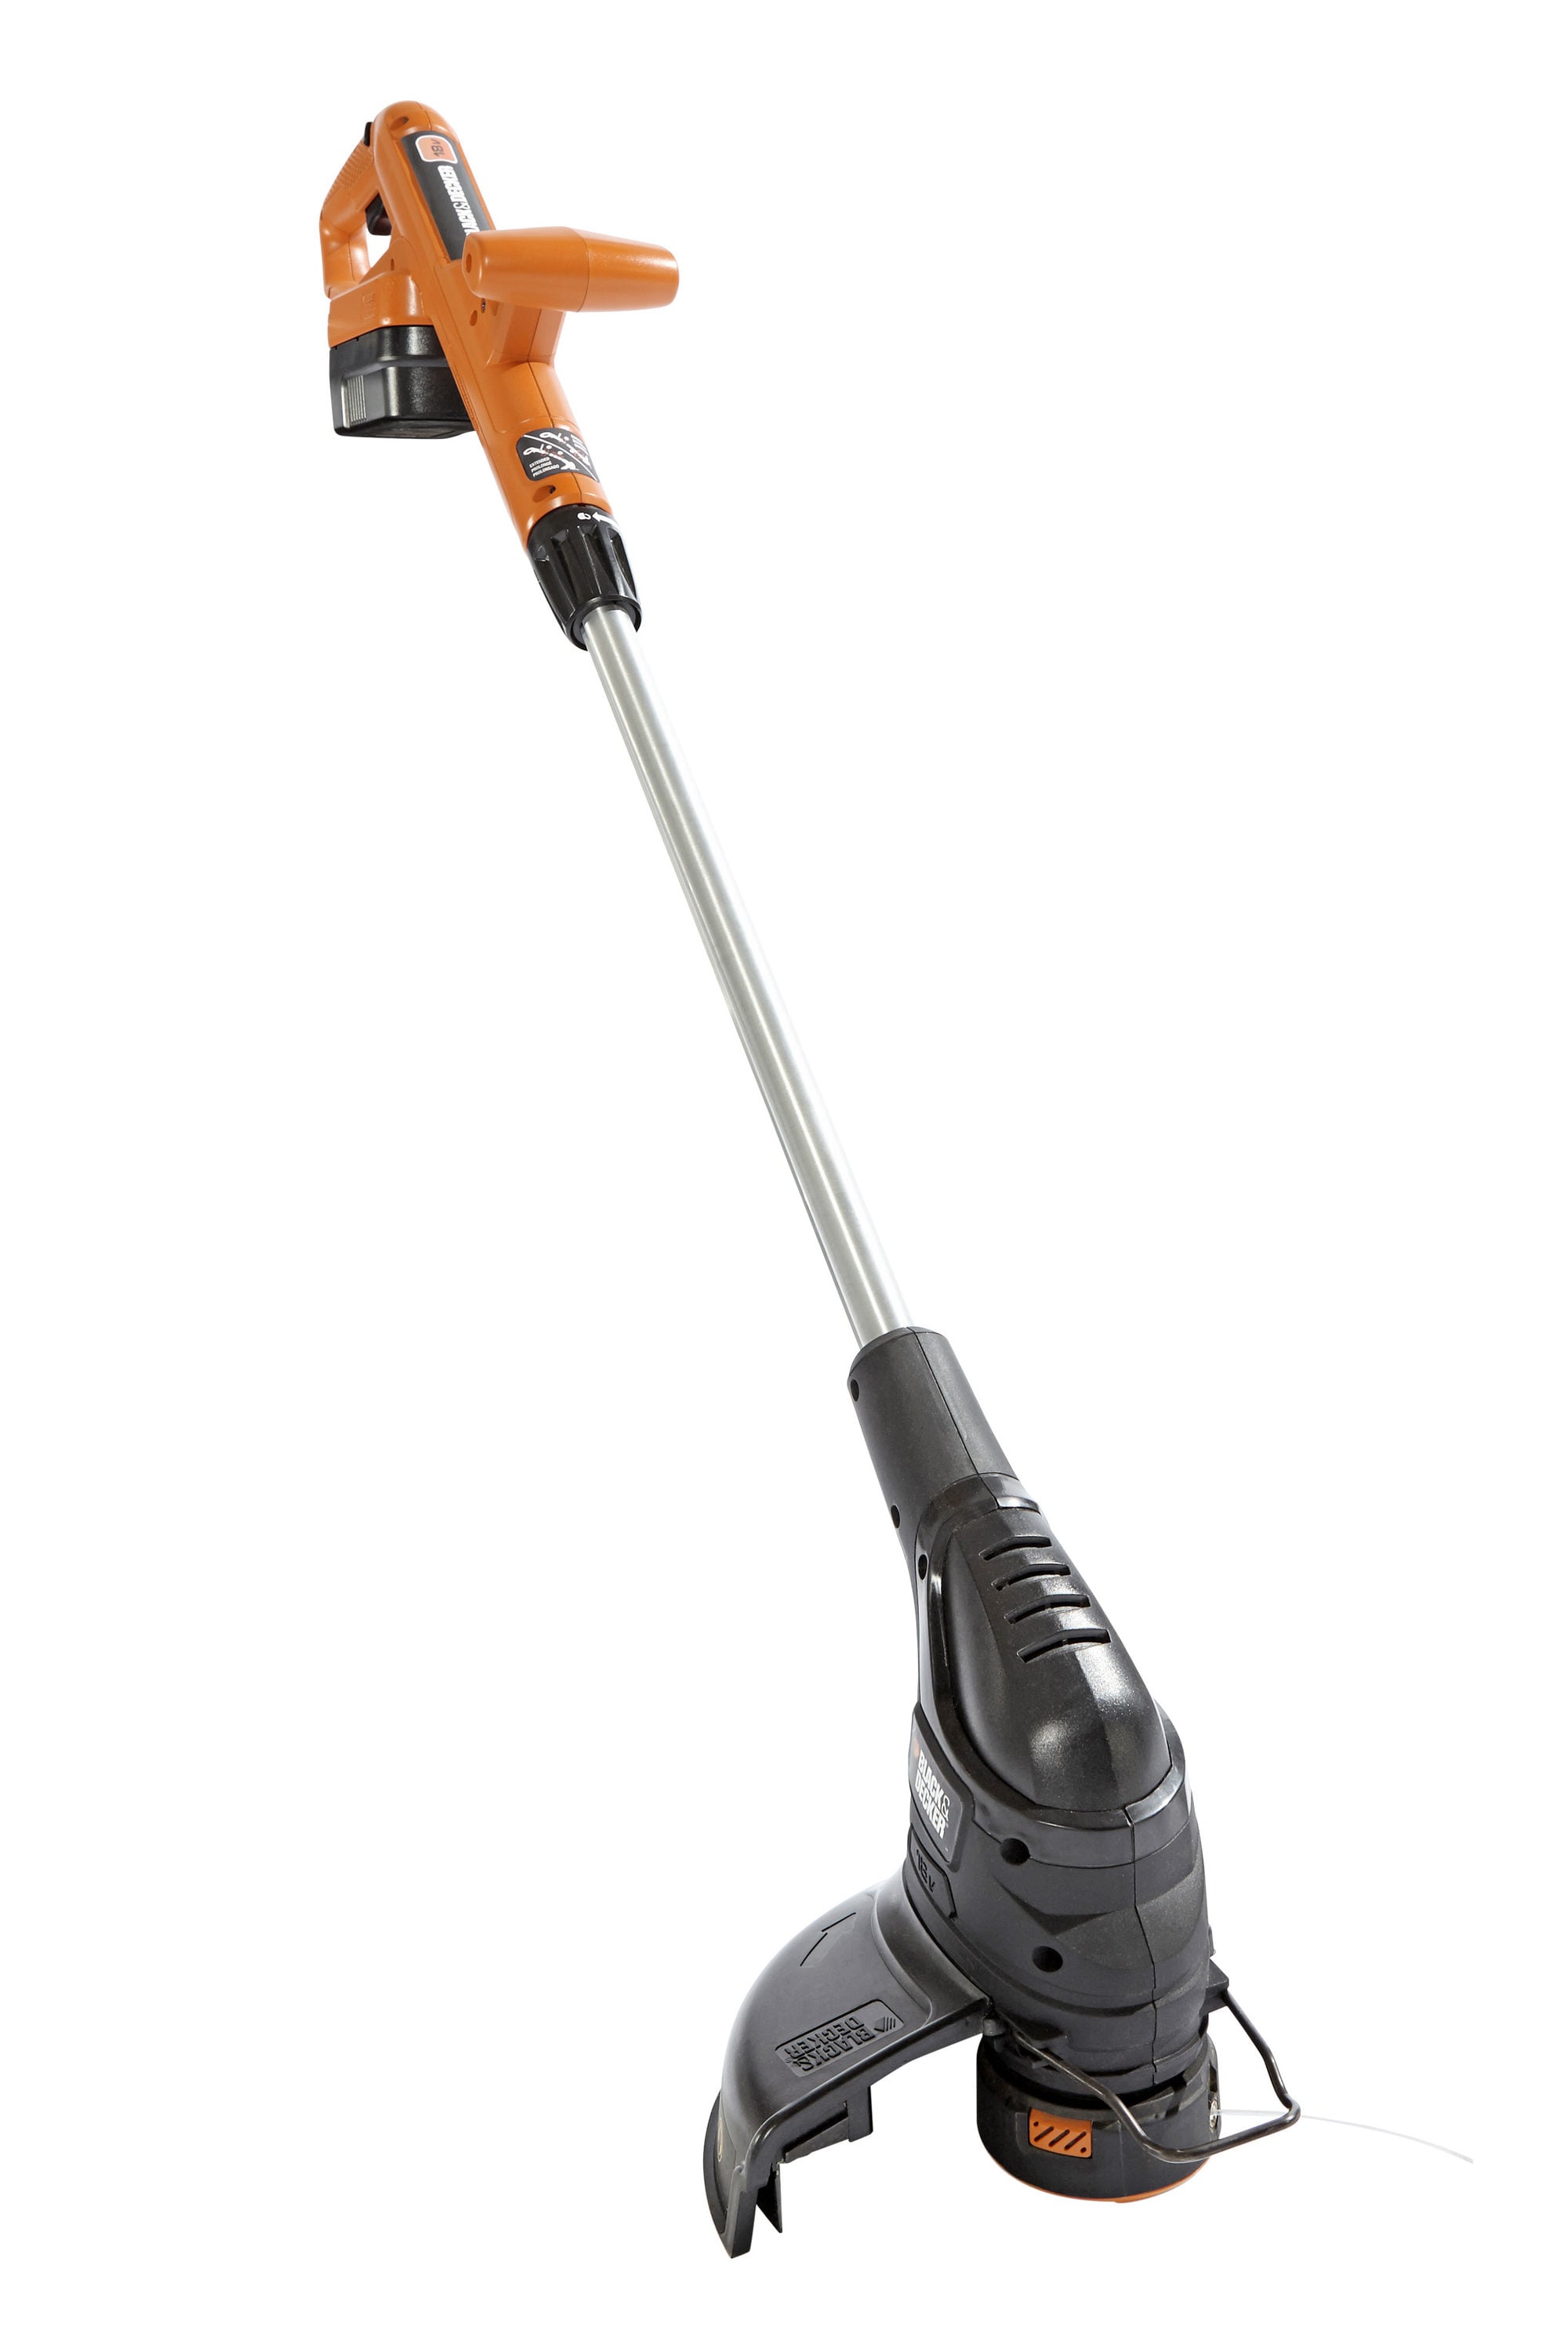 Black & Decker NST1118 (Review and Photos Incl.)